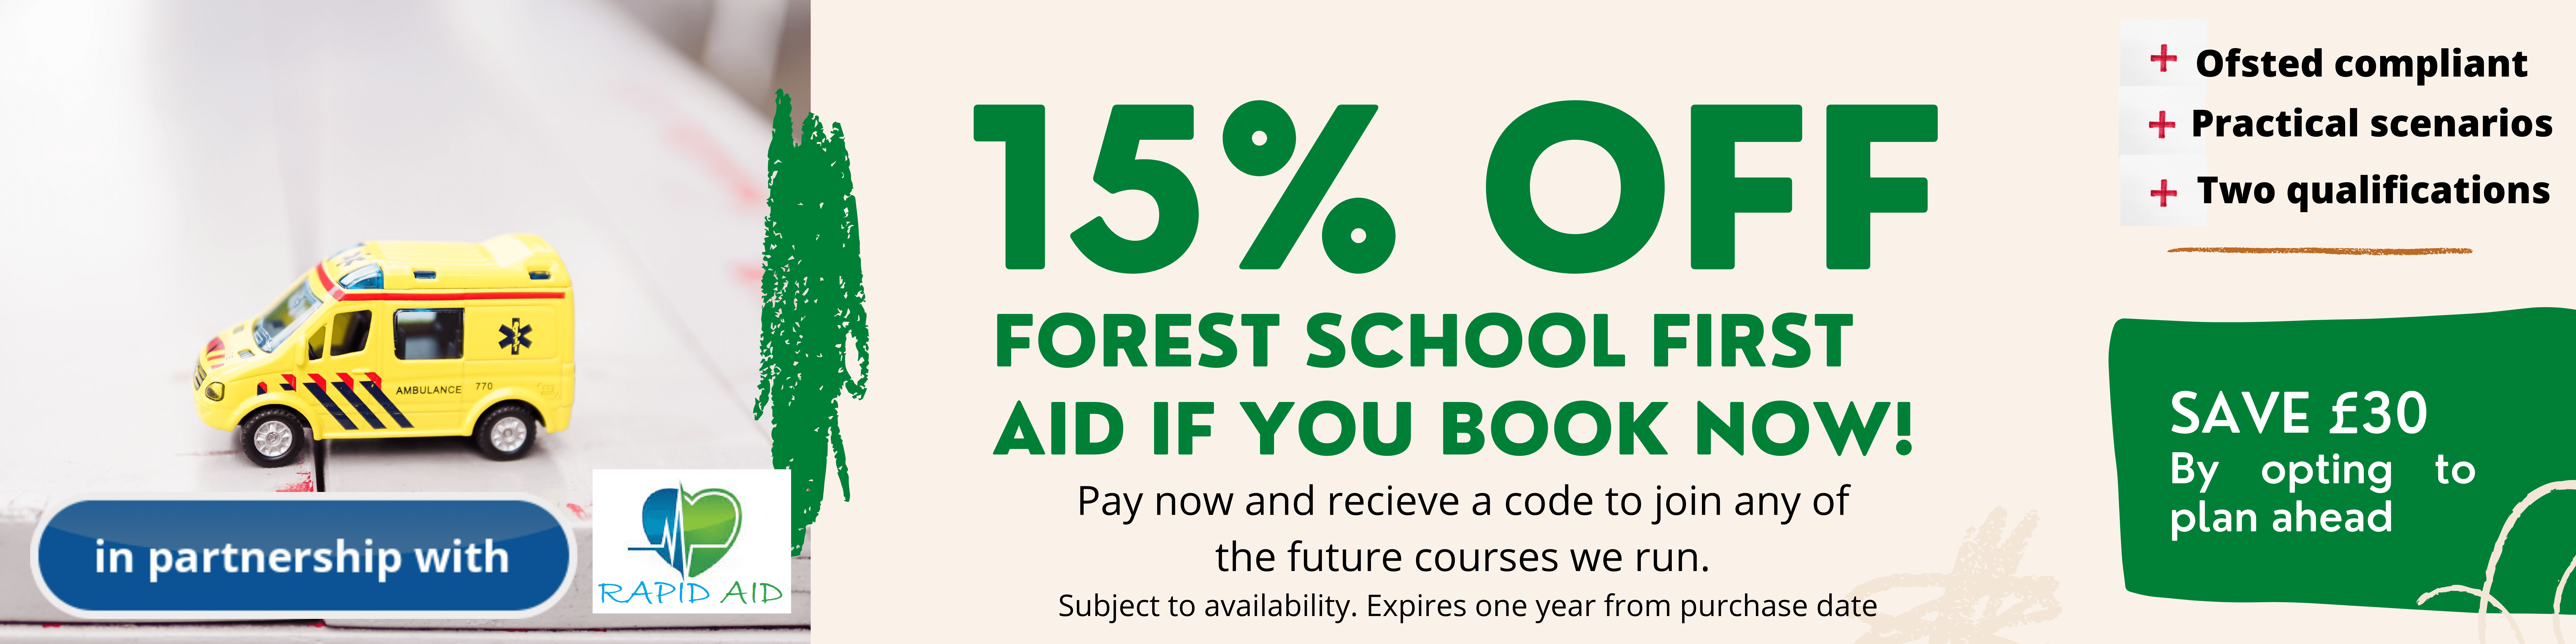 FirstAid_discount Forest School Leader Training - January 2022